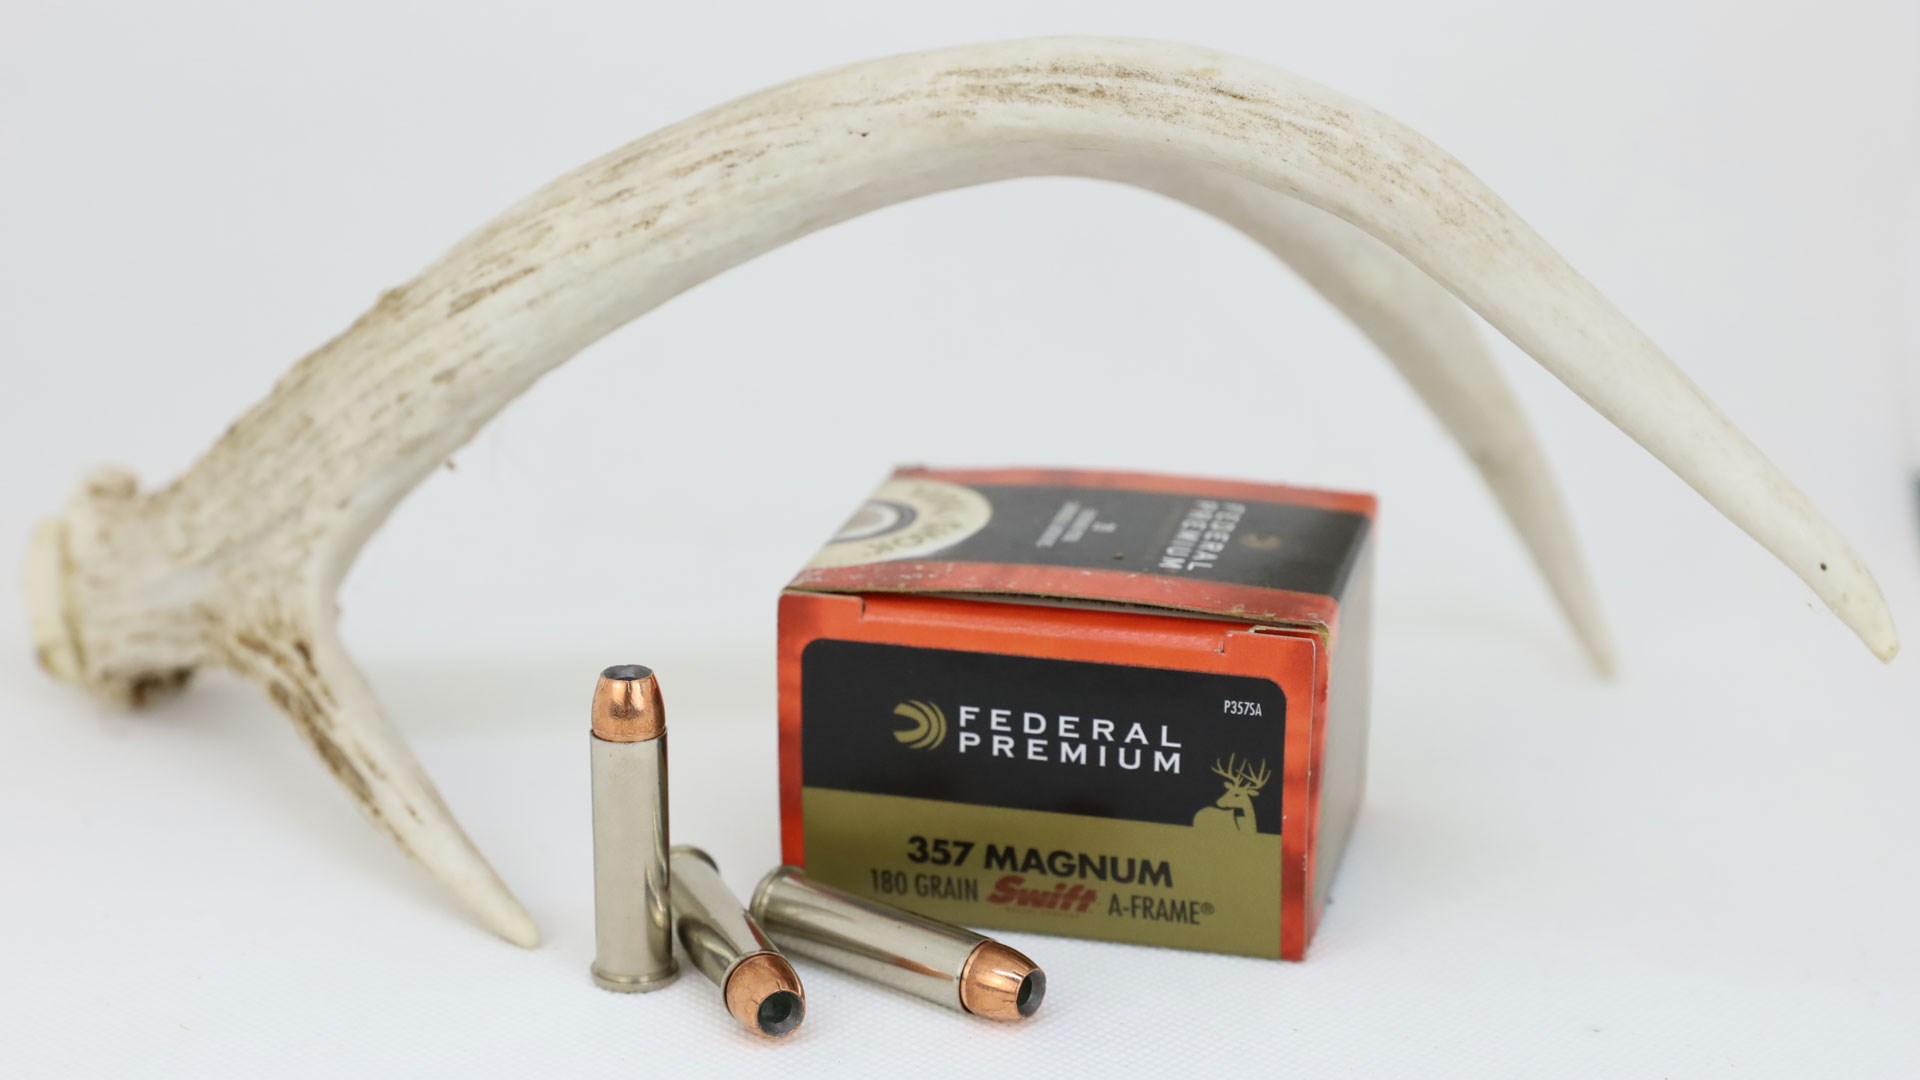 .357 Magnum hollow points with wood and ammo box